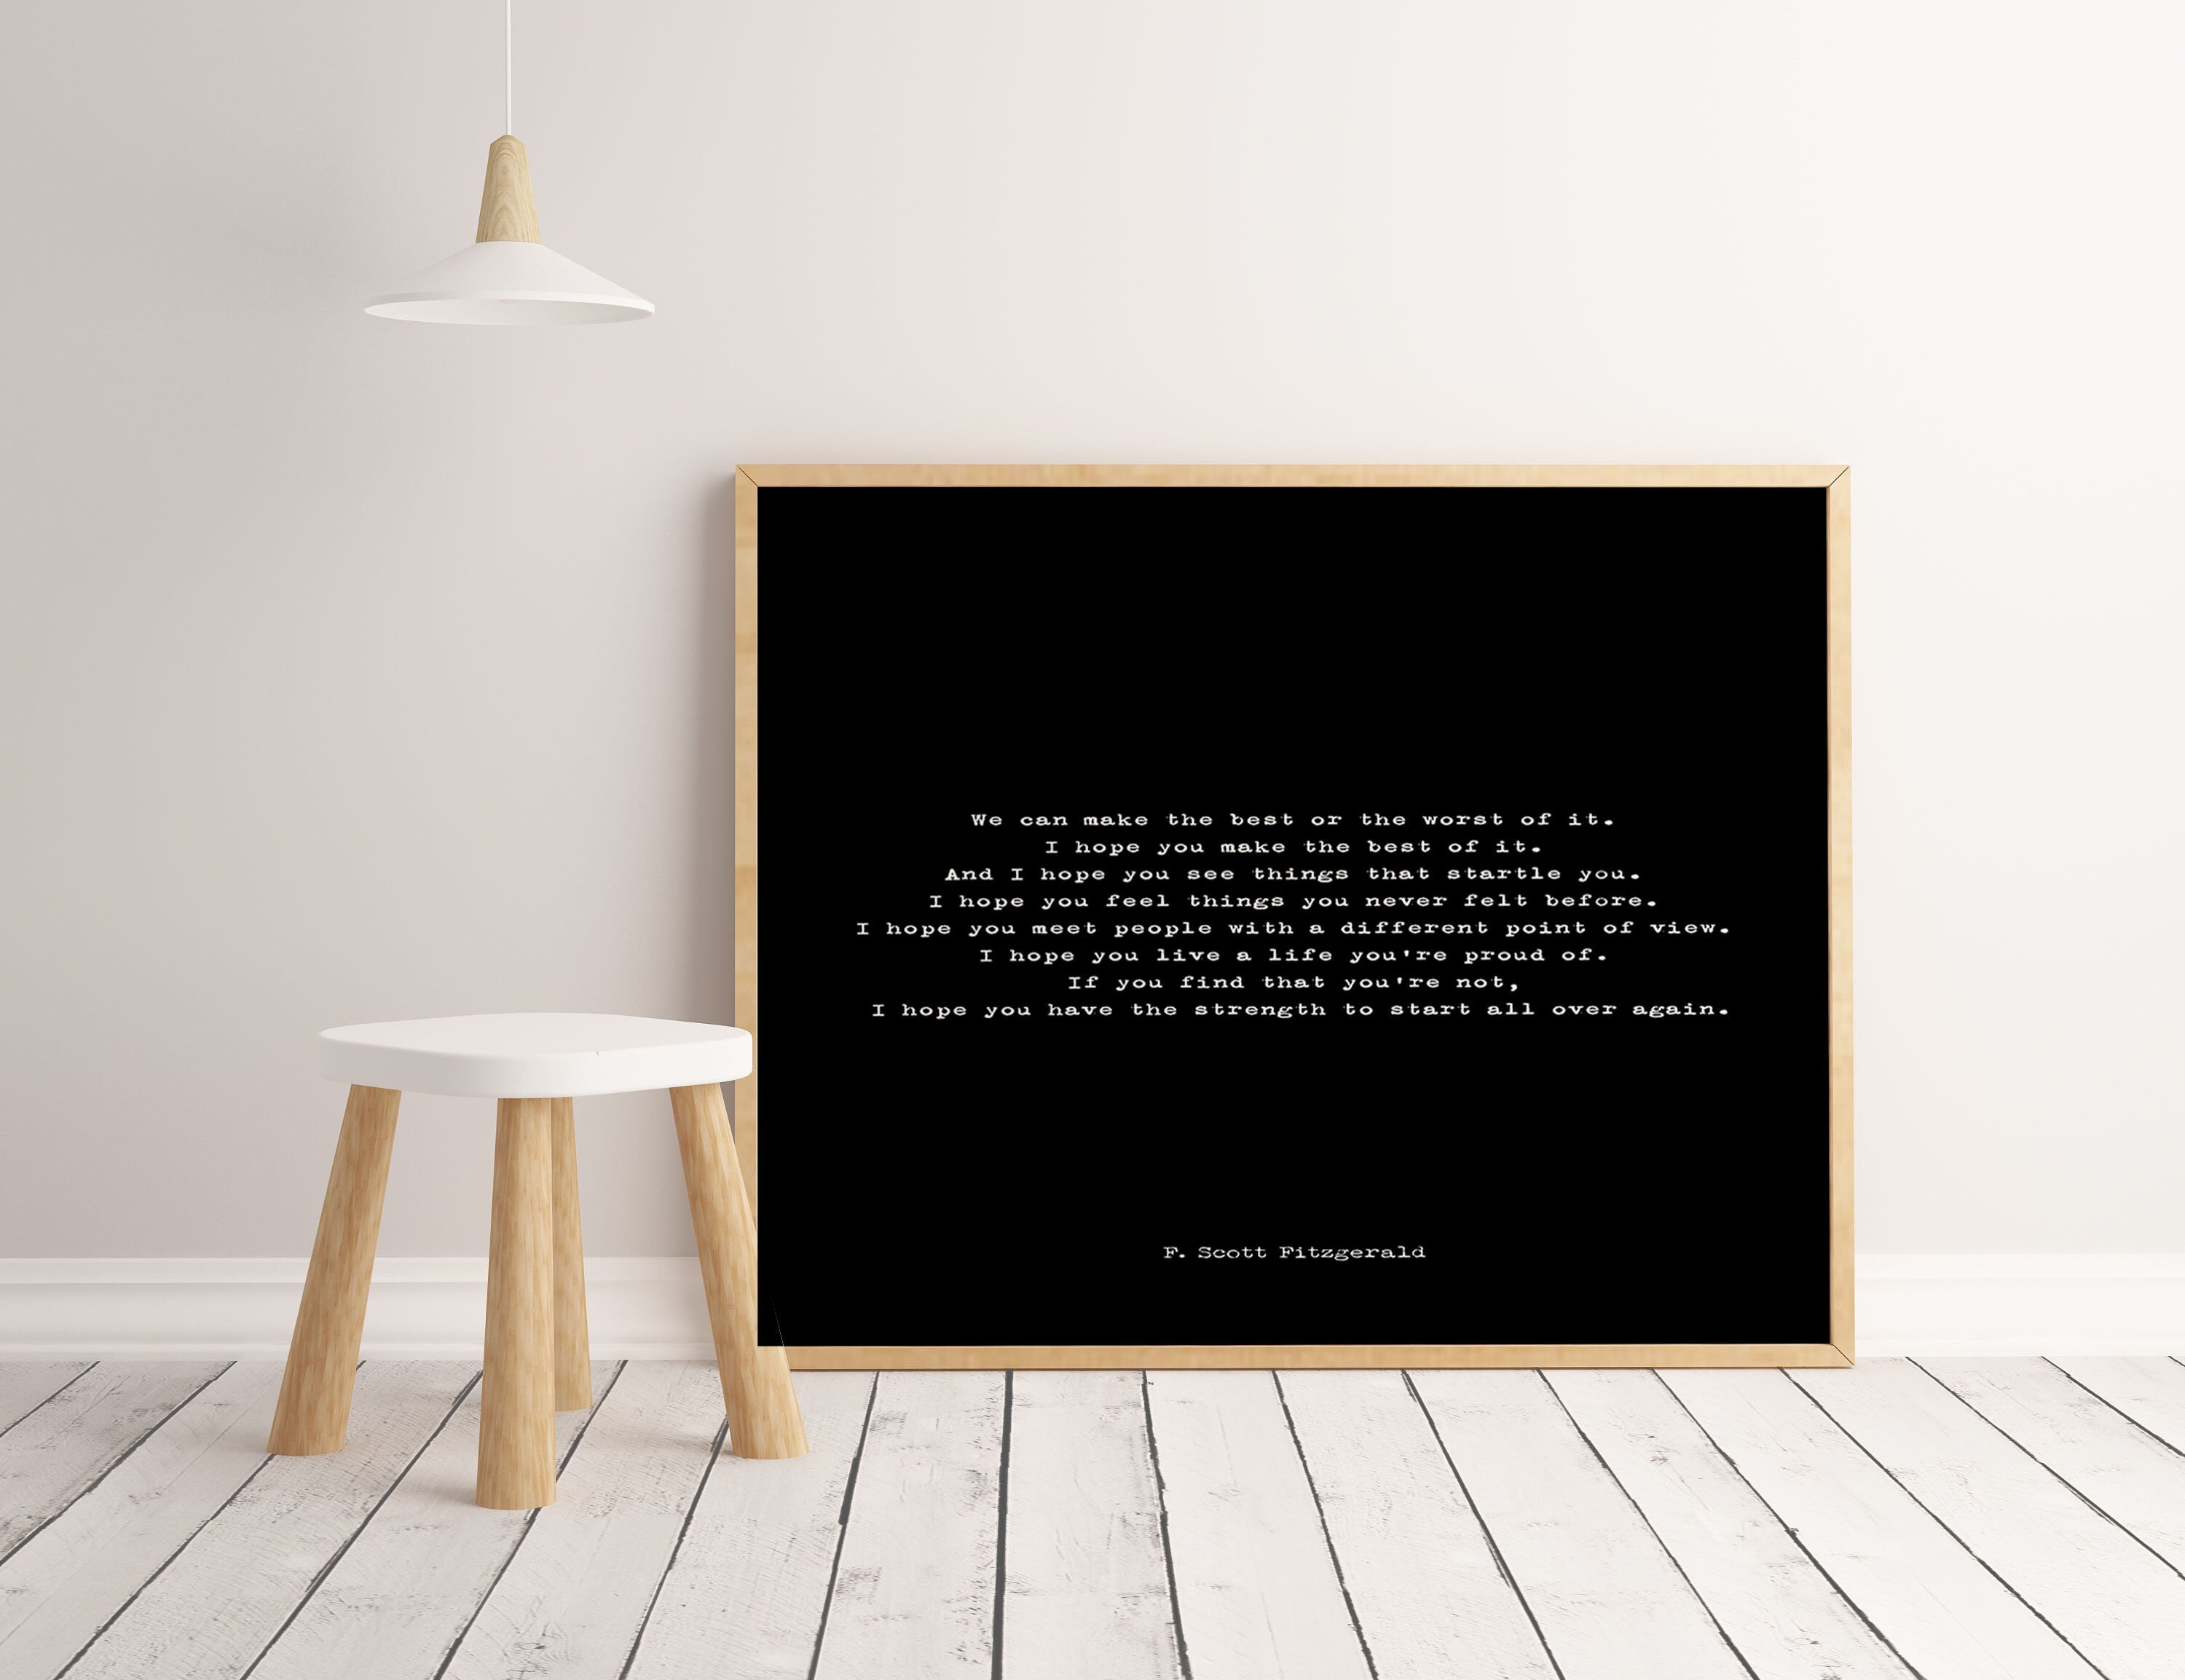 F Scott Fitzgerald Make The Best of It Living Room Wall Art Inspirational Gift, Unframed Typography Quote Print in Black & White